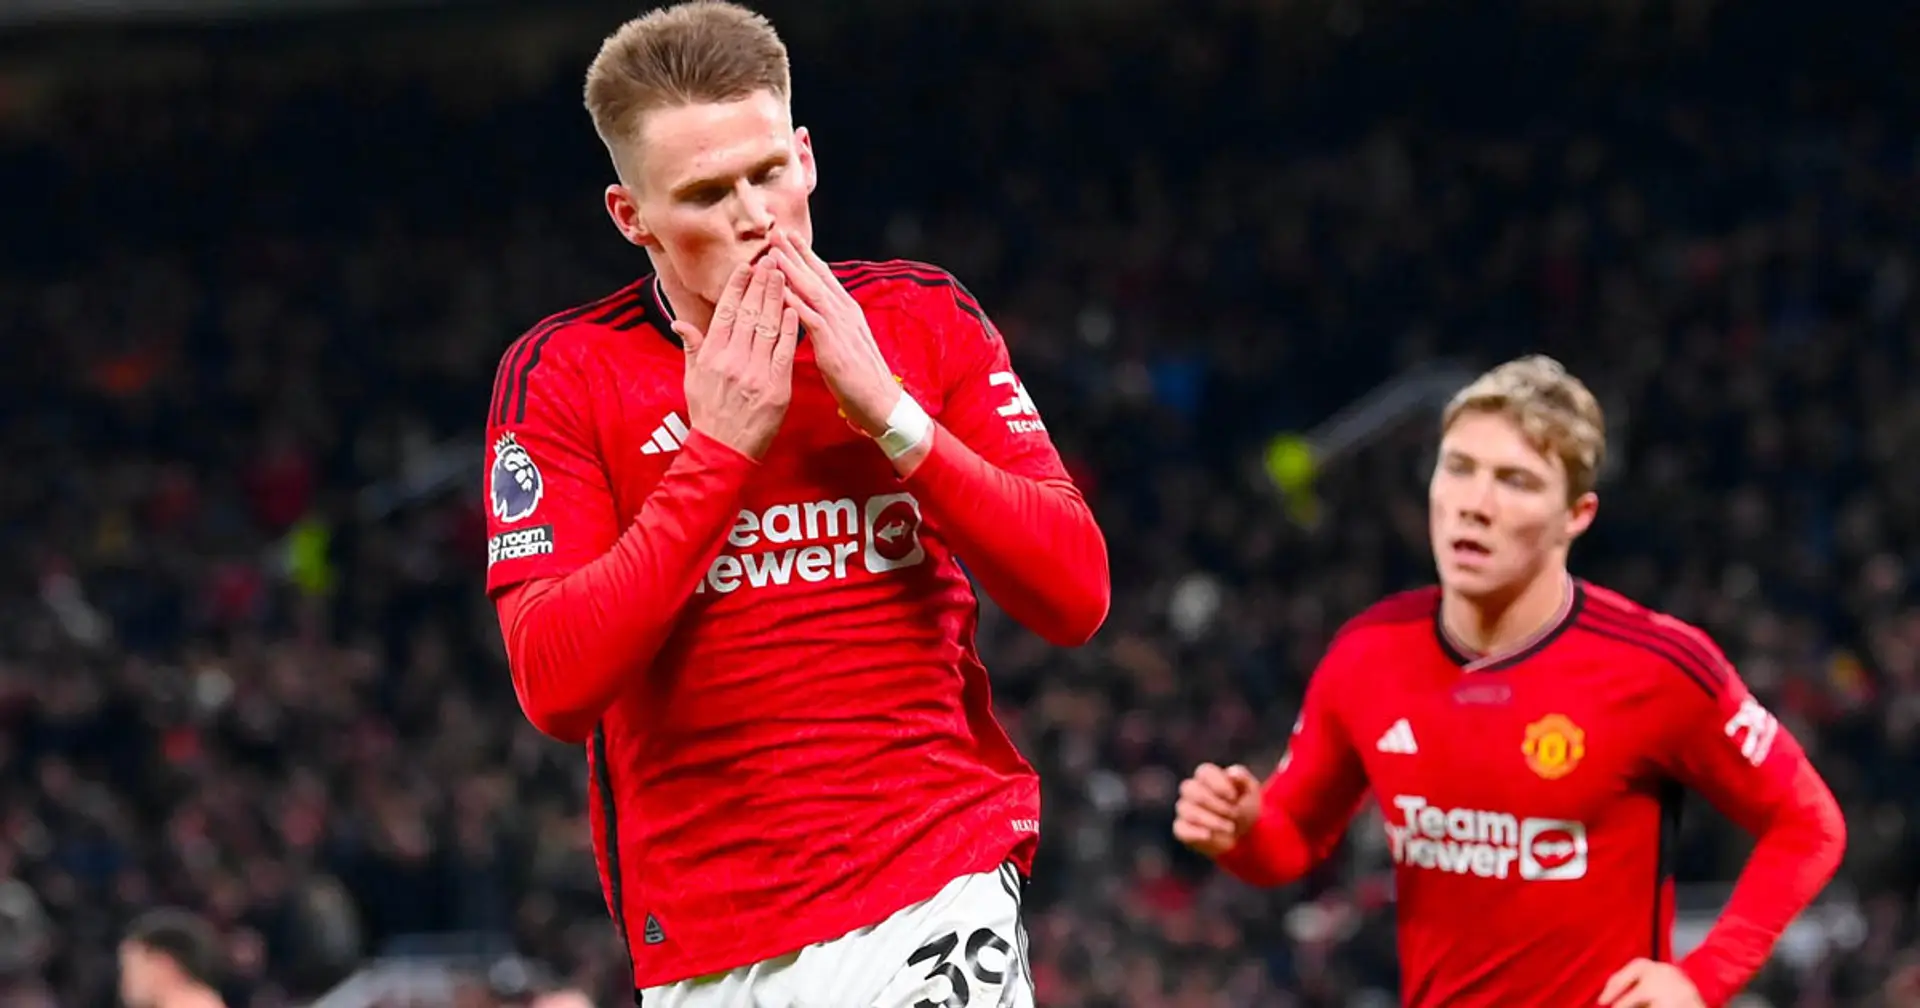 McTominay – 8, Lindelof – 4: rating Man United players in Chelsea win